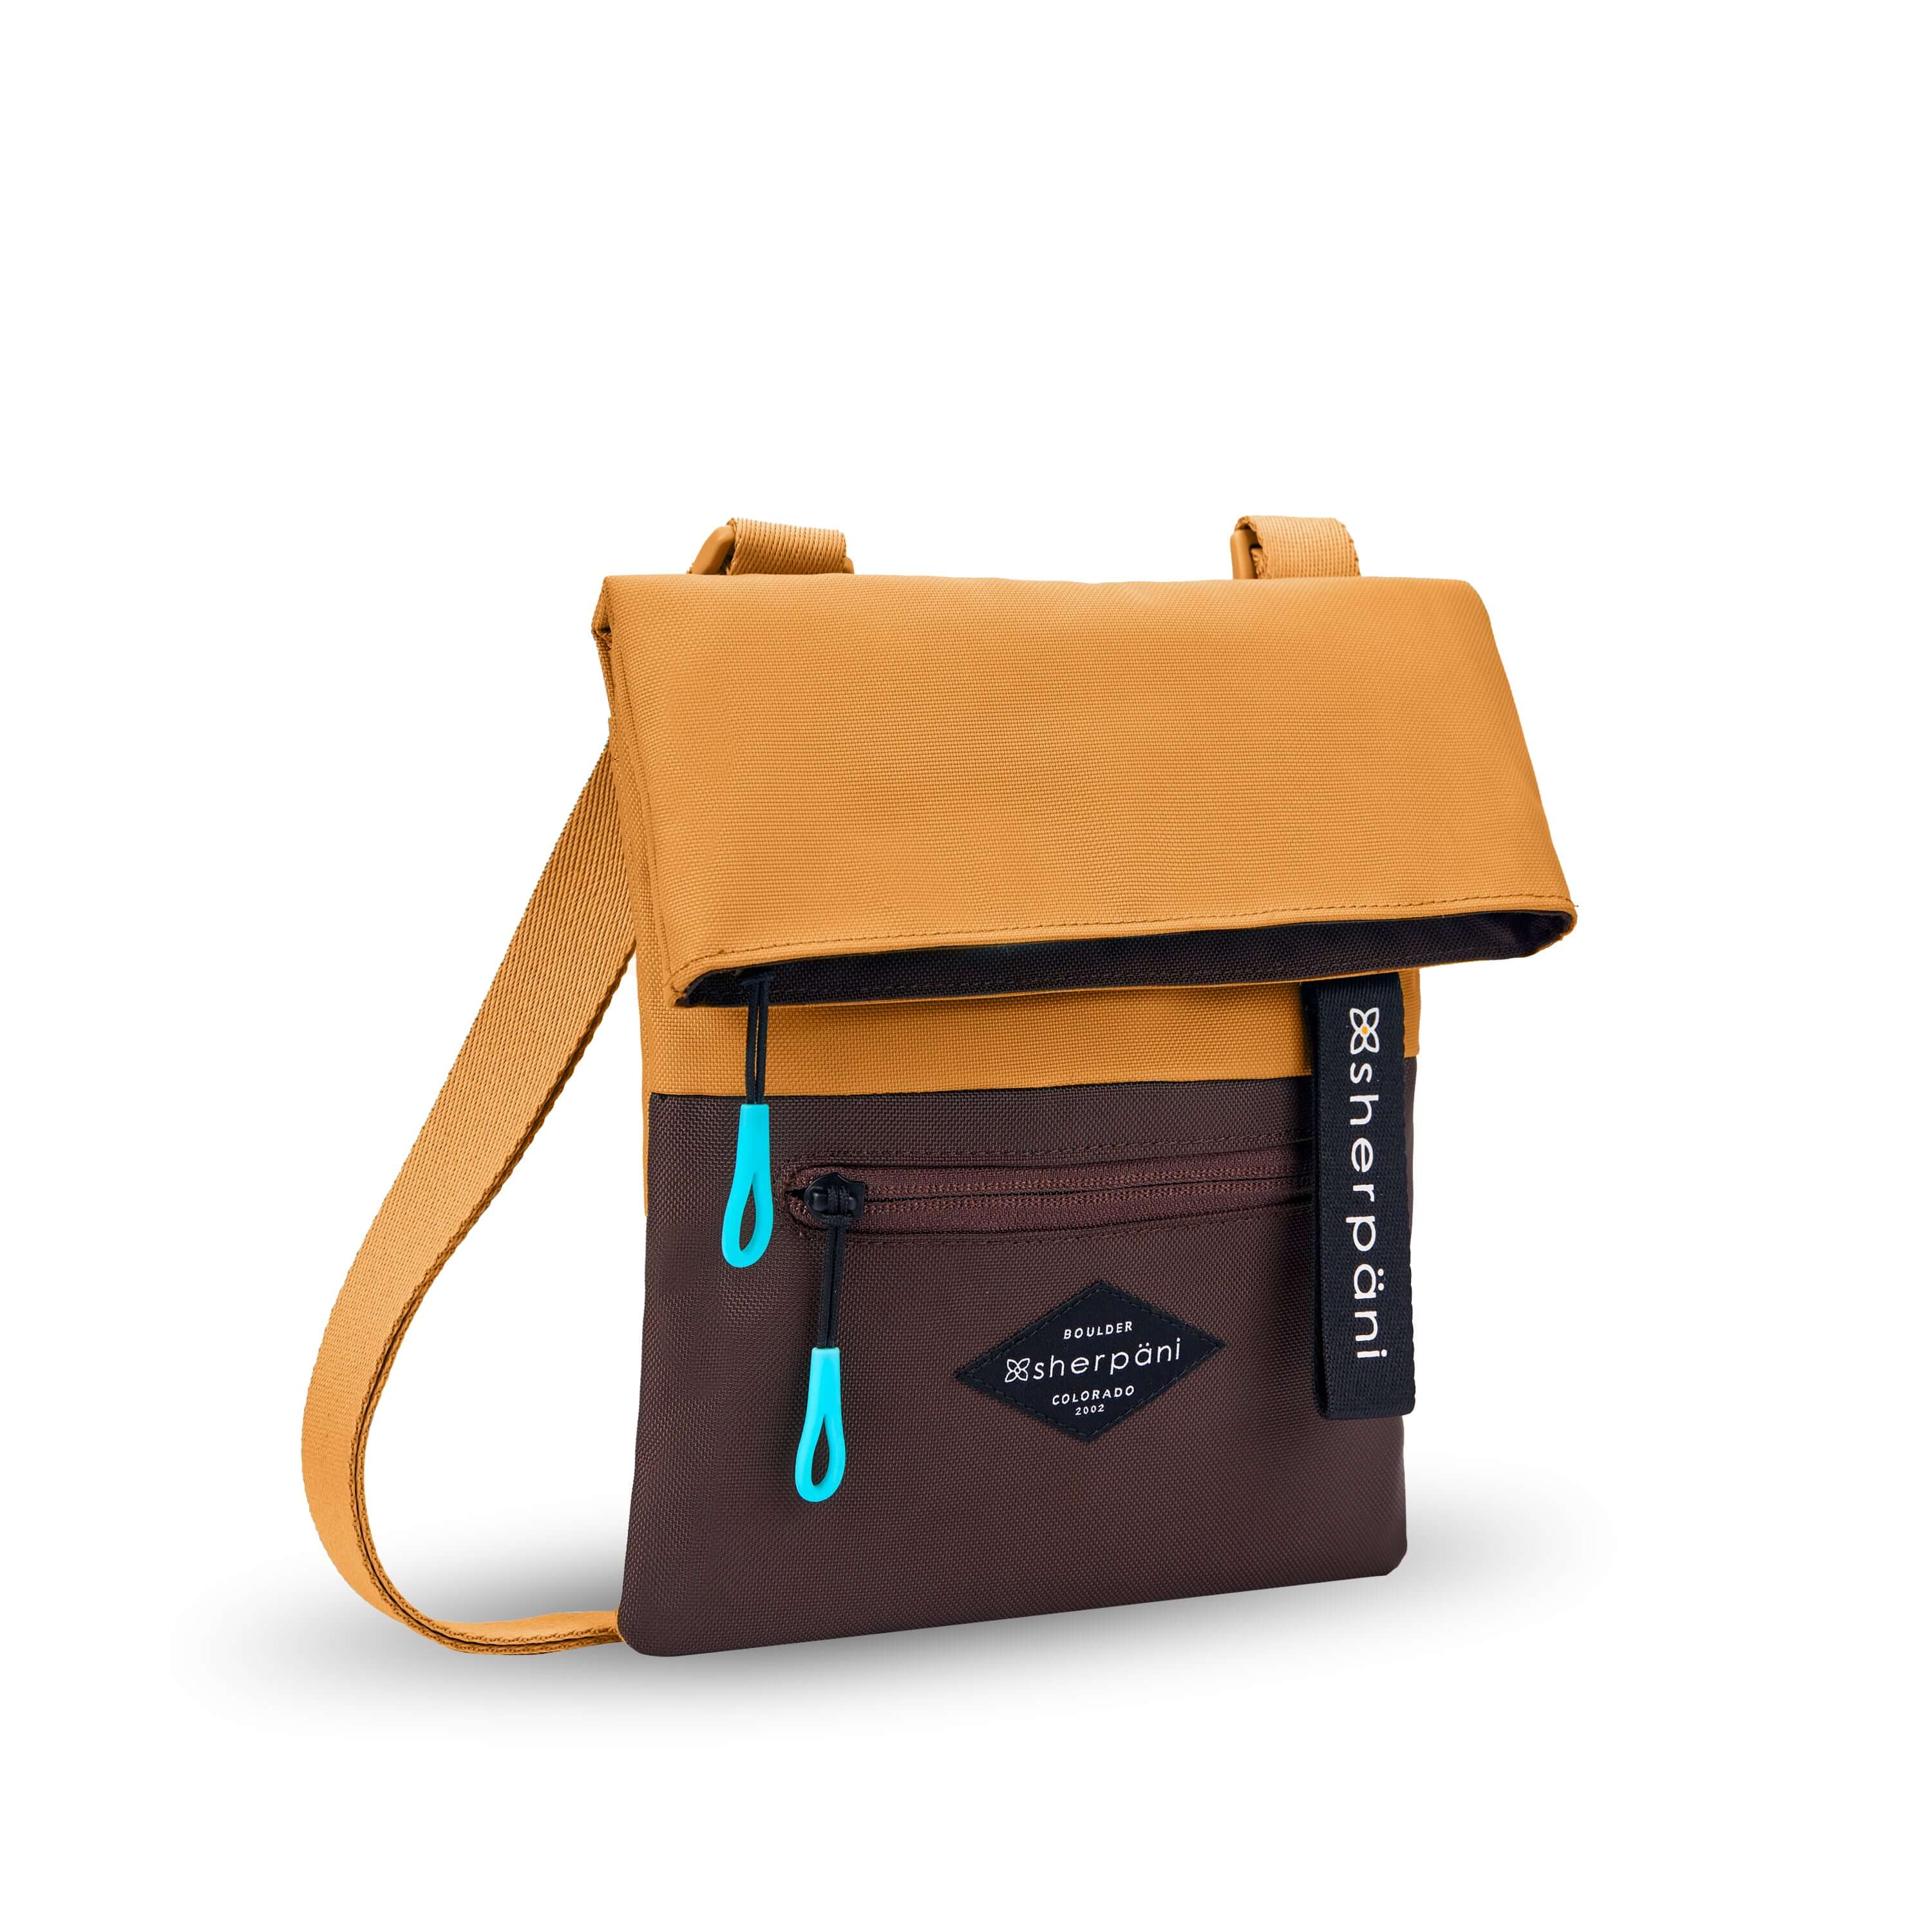 Angled front view of Sherpani crossbody, the Pica in Sundial. The bag is two toned: the top half is burnt yellow and the bottom half is brown. There is an external zipper pocket on the front panel. Easy-pull zippers are accented in aqua. The top of the bag folds over creating a signature look. A branded Sherpani keychain is clipped to the upper right corner. The bag has an adjustable crossbody strap. 